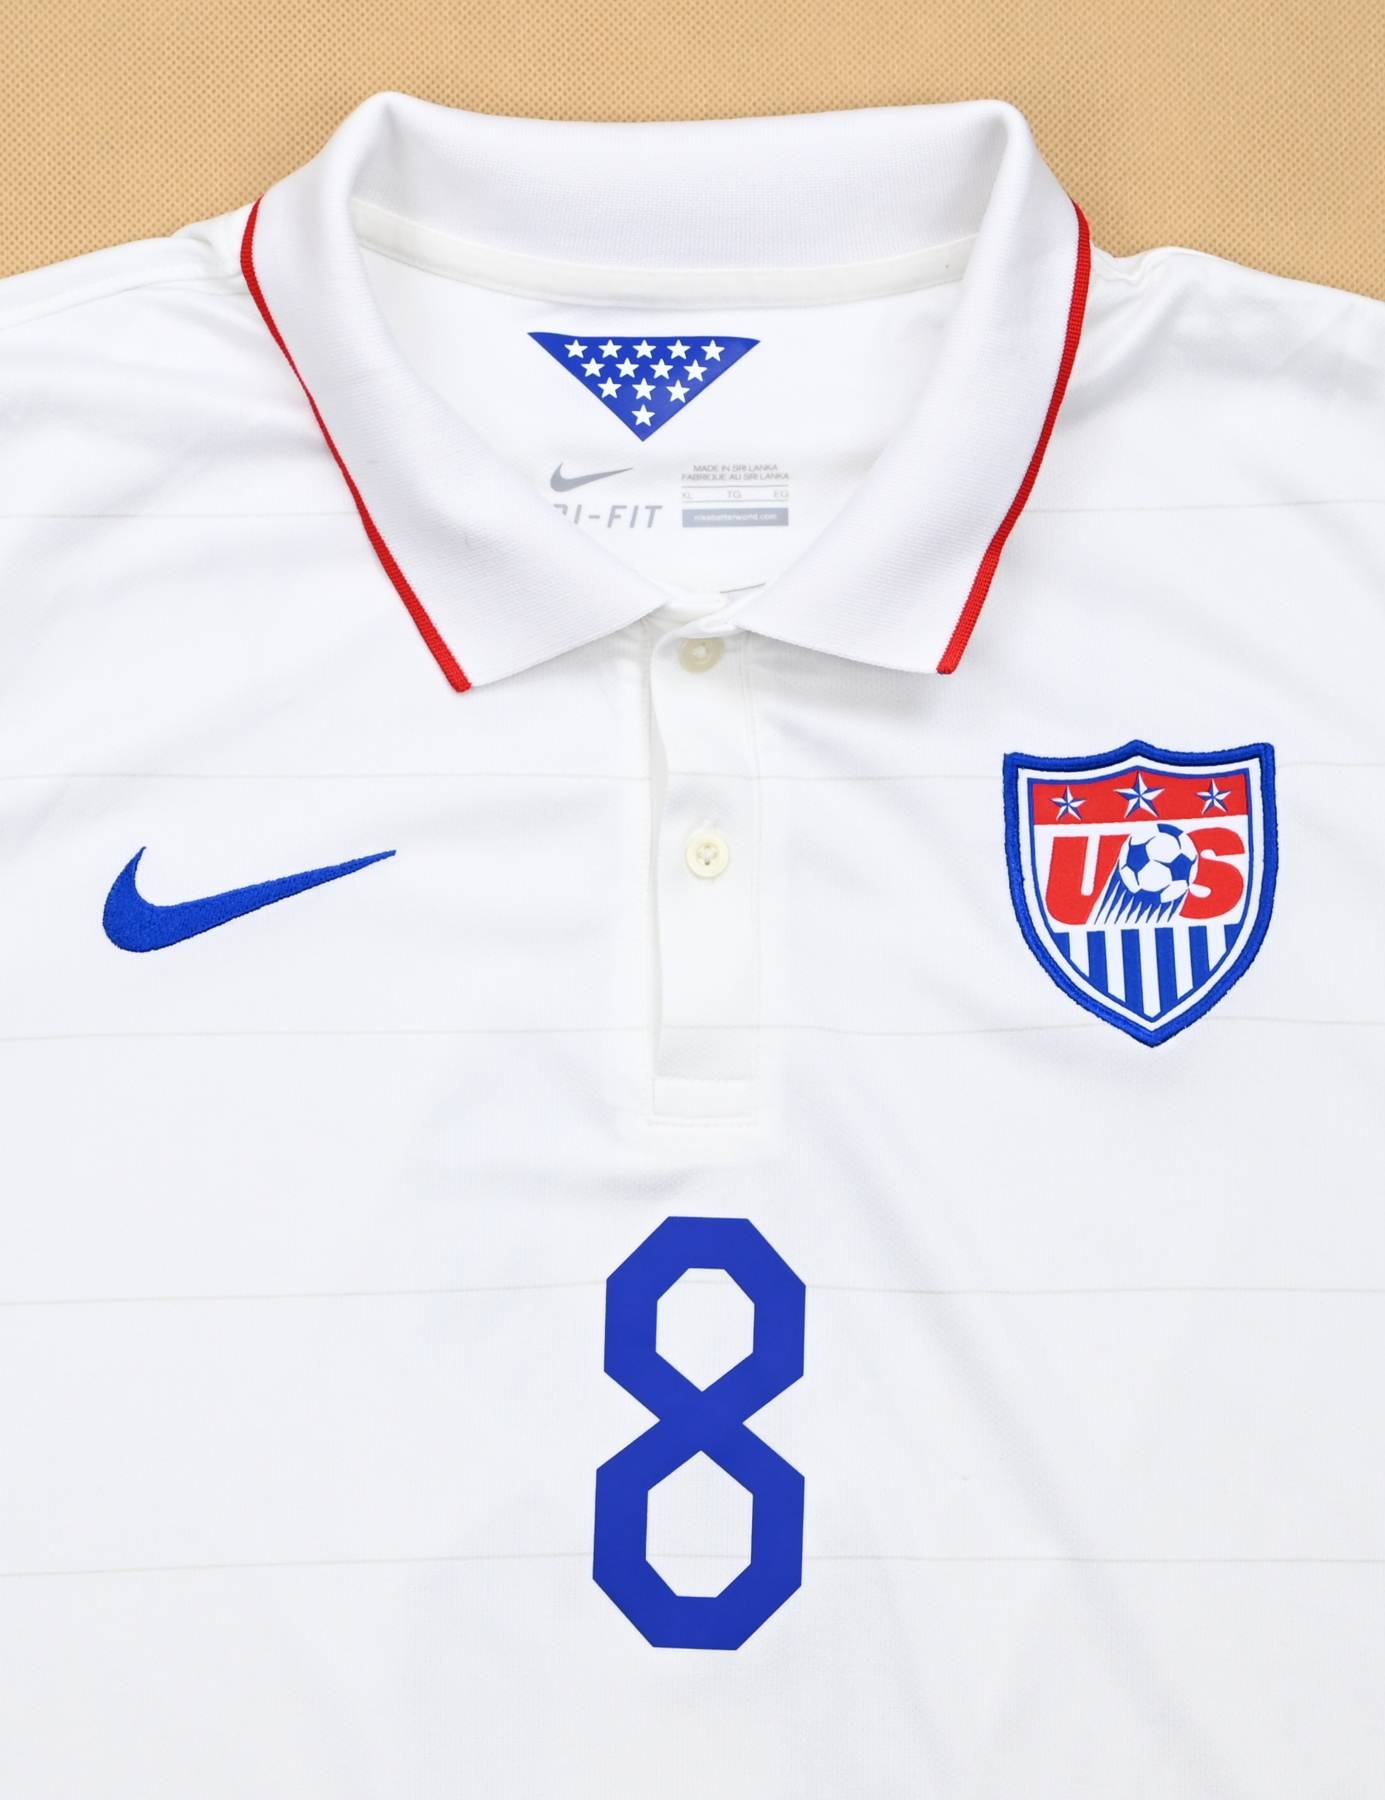 USA 2016 Home Shirt #8 Clint Dempsey - Online Shop From Footuni Japan